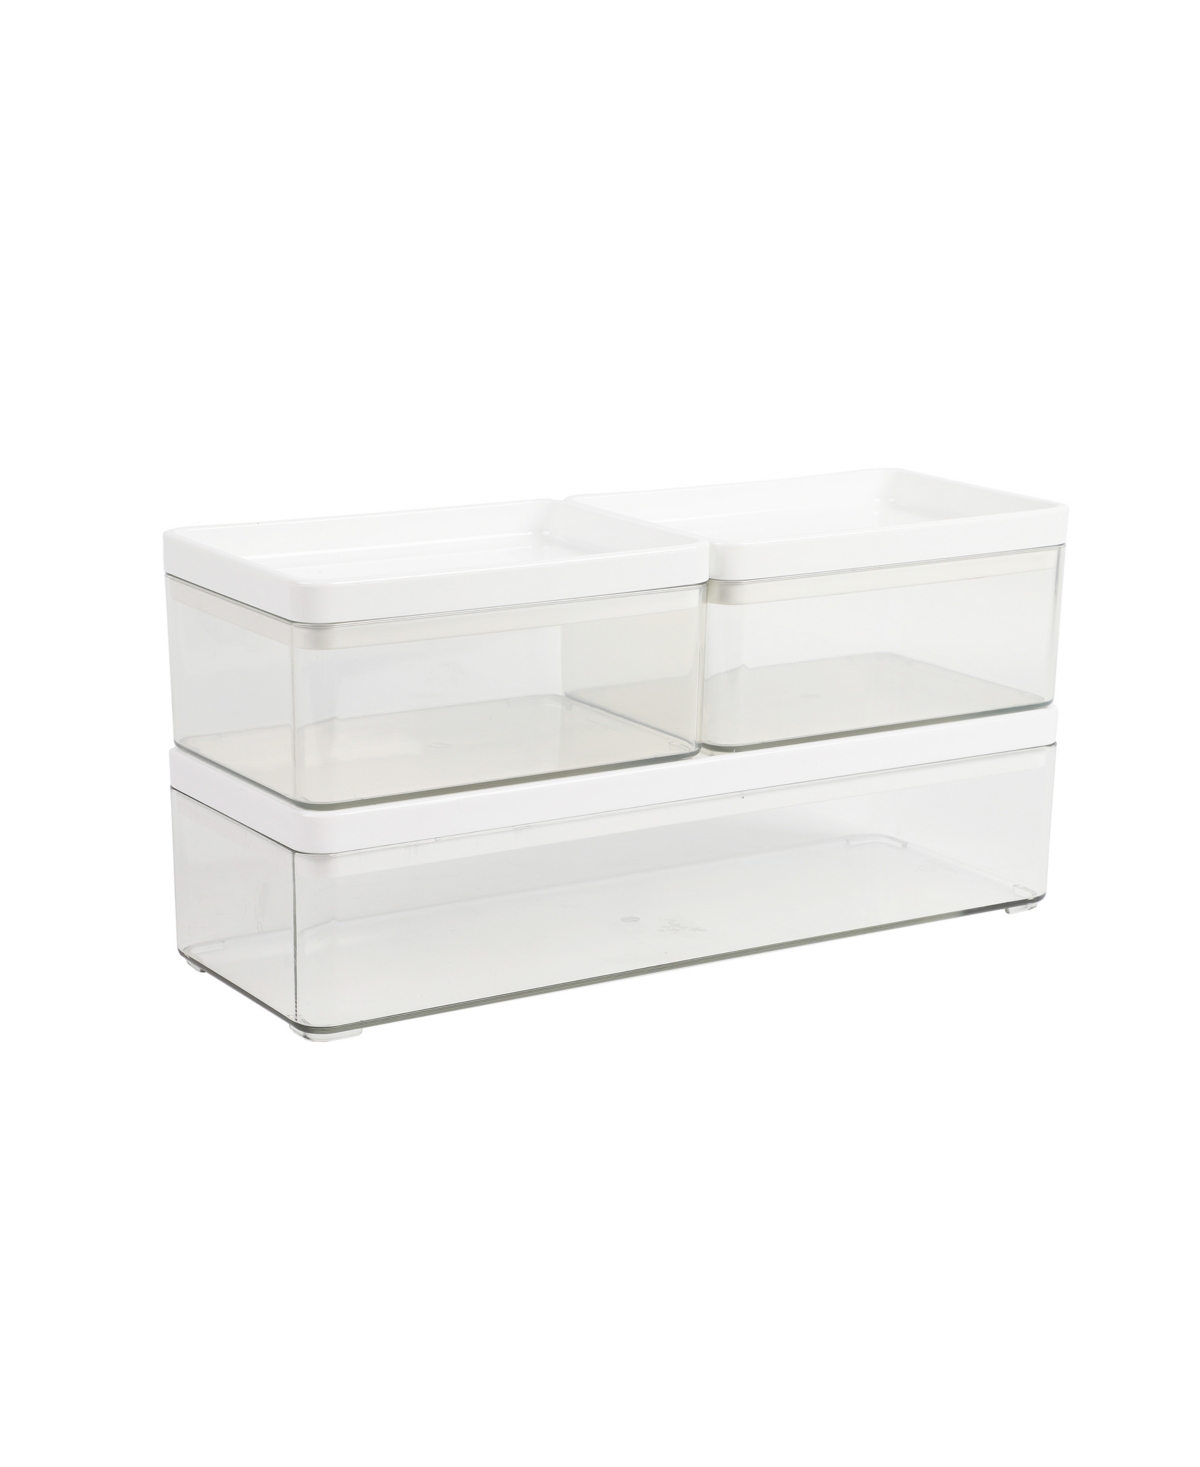 Grady Set of 3 Plastic Stackable Storage Boxes with Plastic Lids - Clear, White